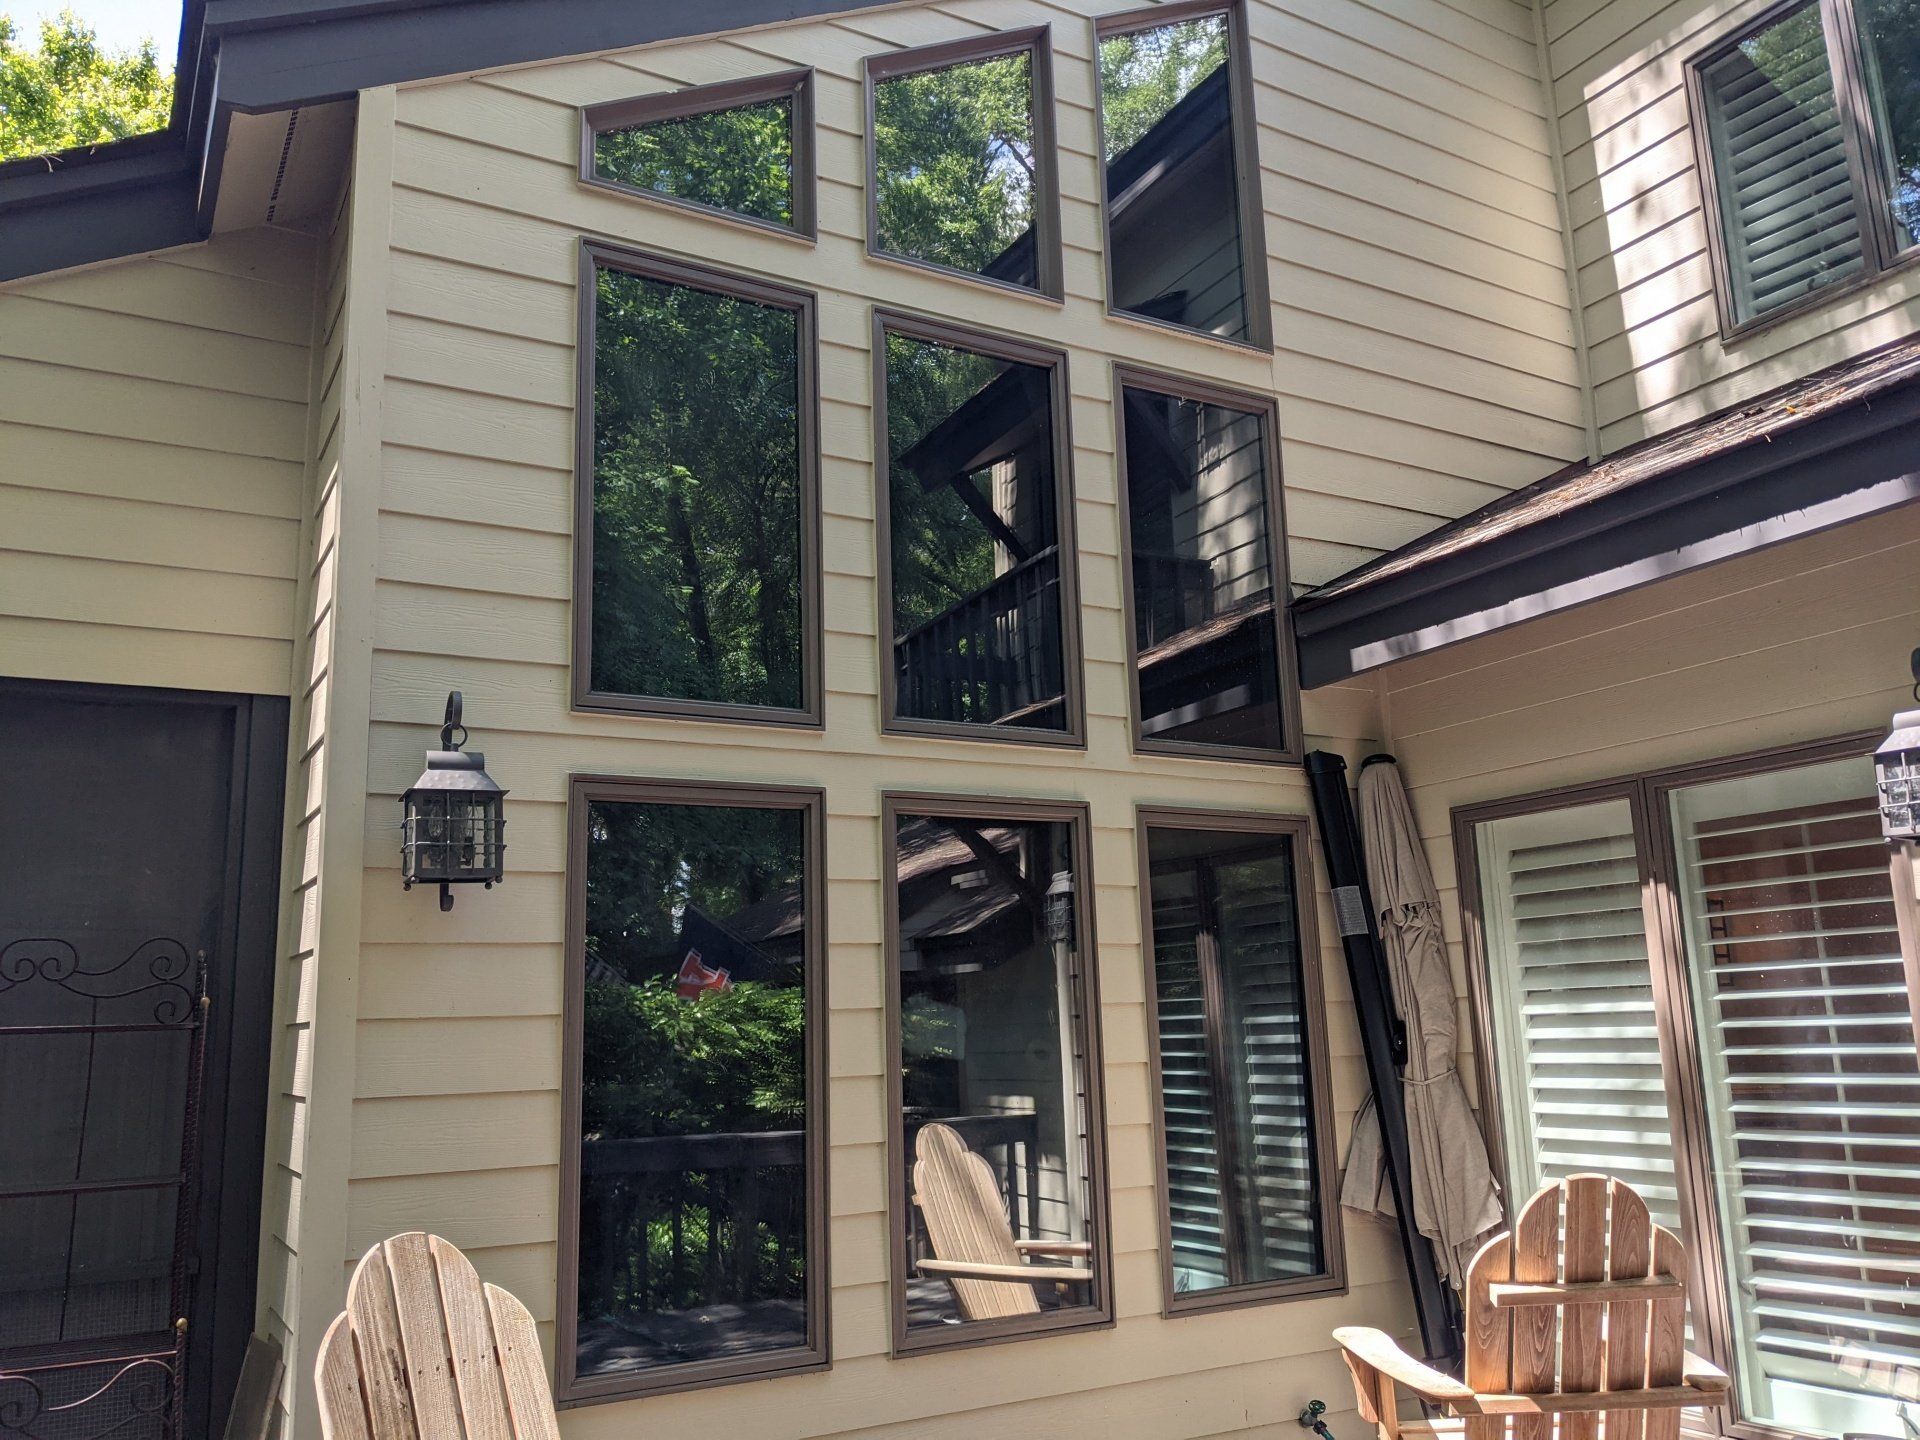 SPF Performance Residential Window Tint installed blocking heat from this home in Alex City, AL